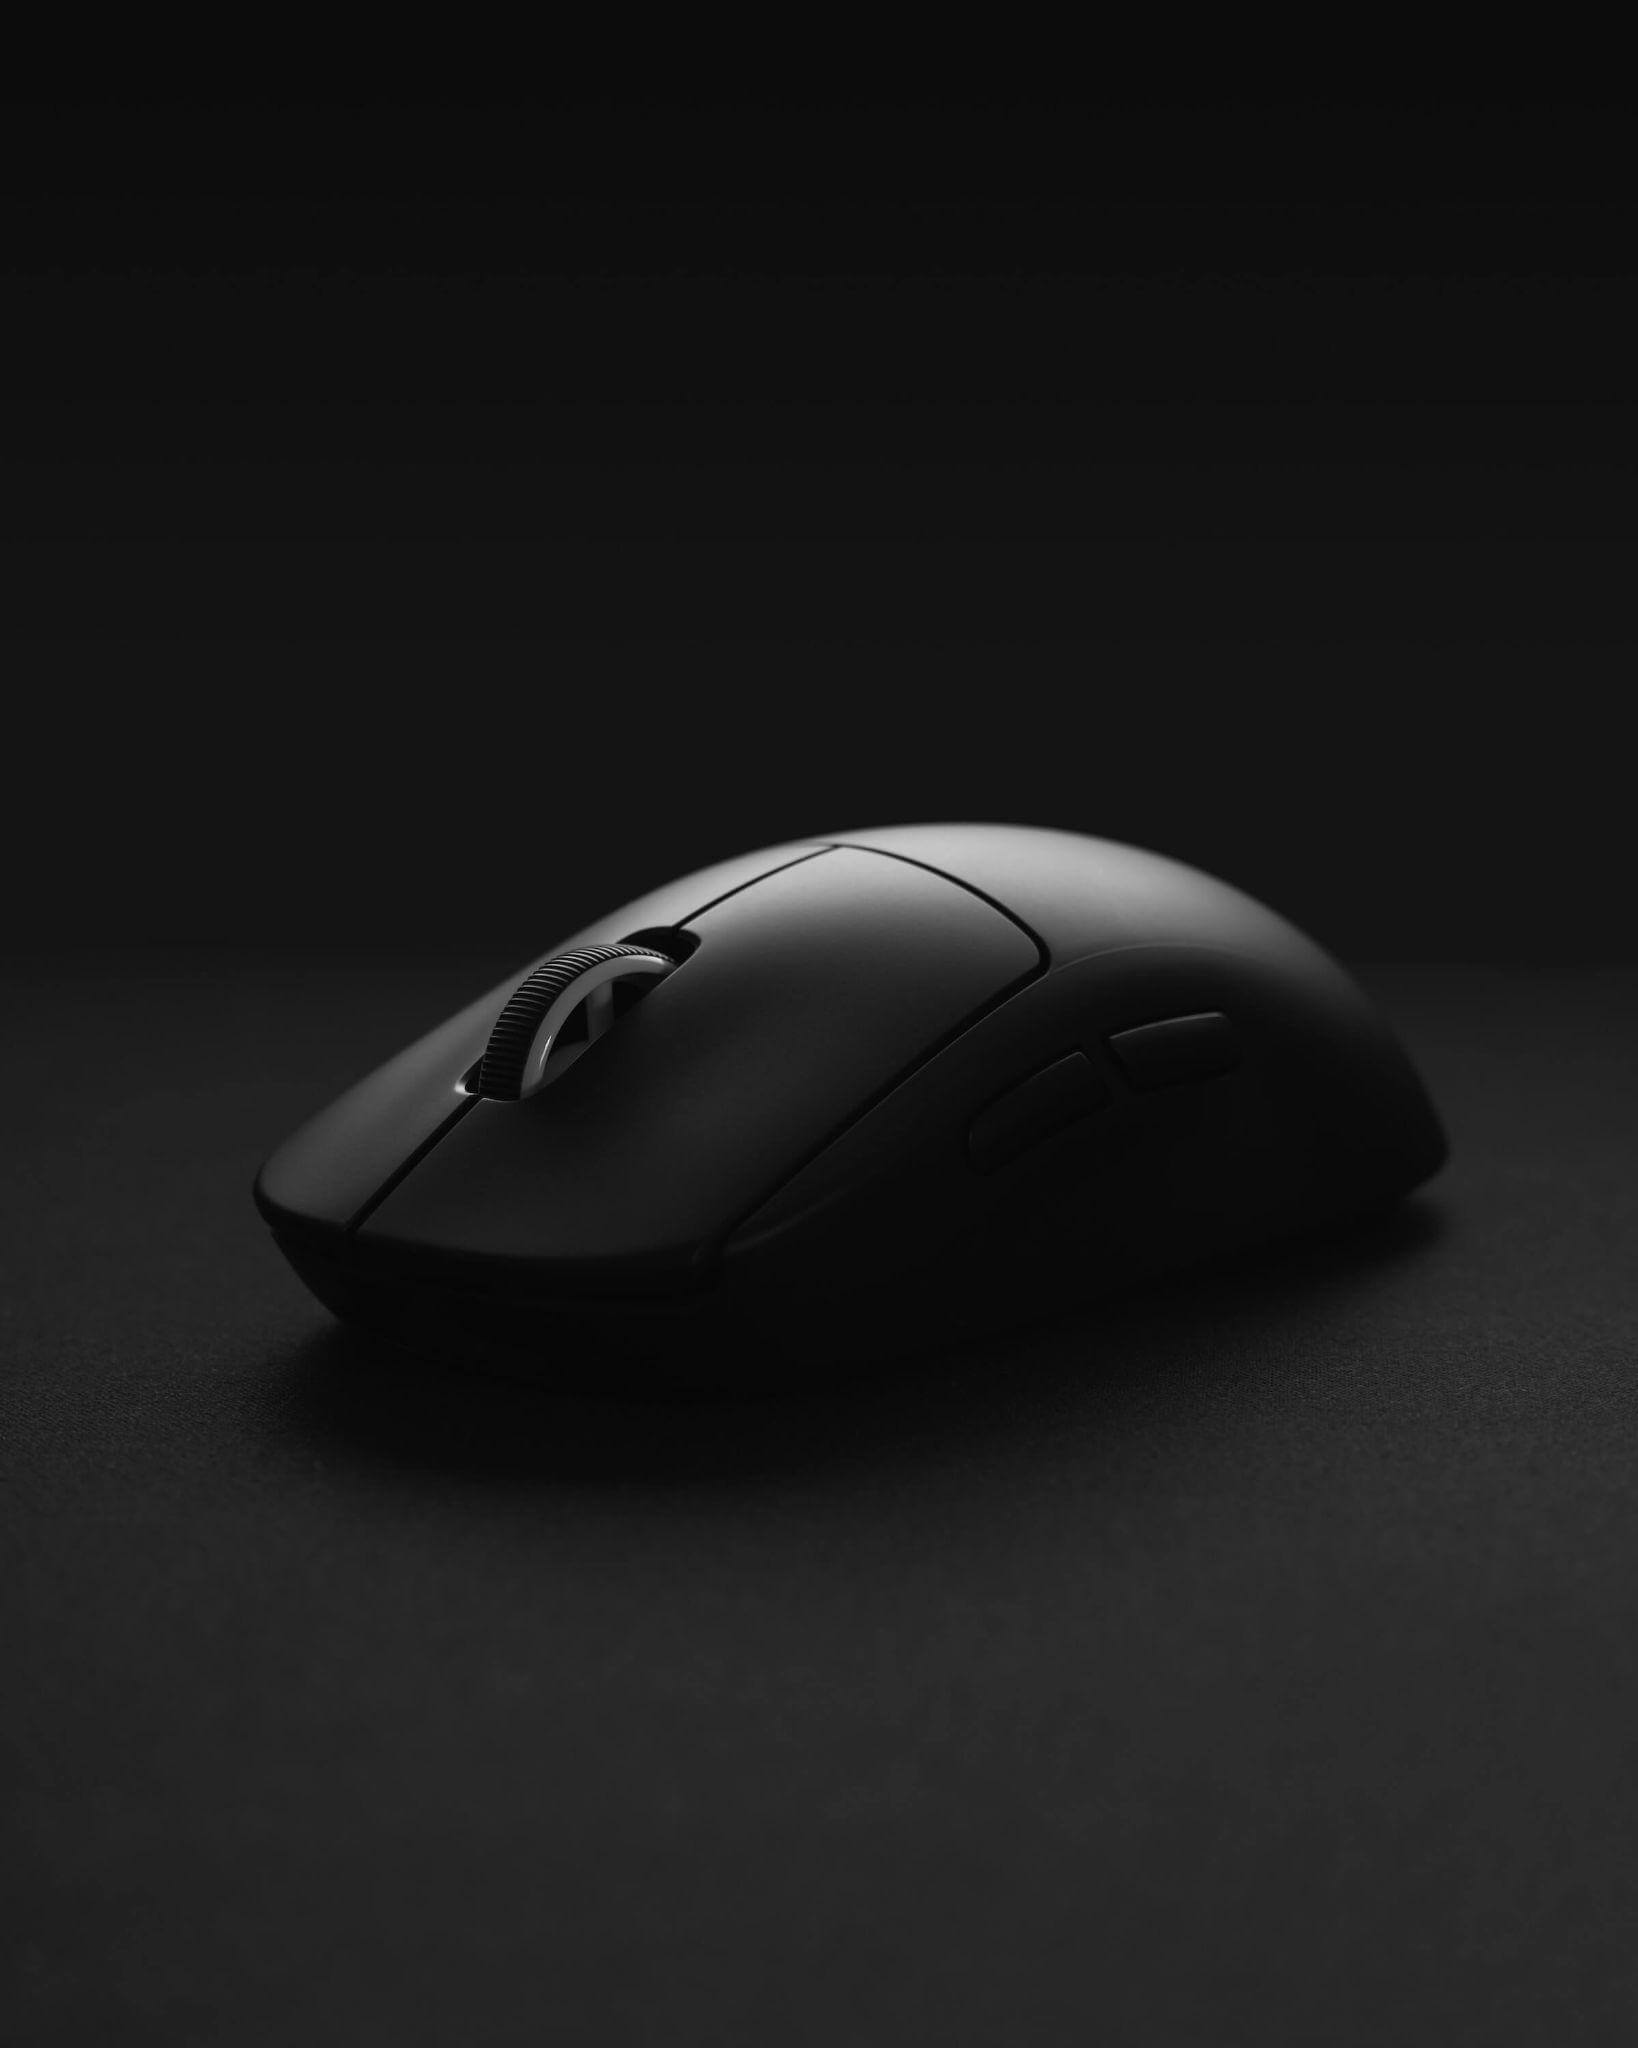 If we want to hit not only the tabs in the browser, but also the heads in Counter Strike, these mice are not interesting to us.